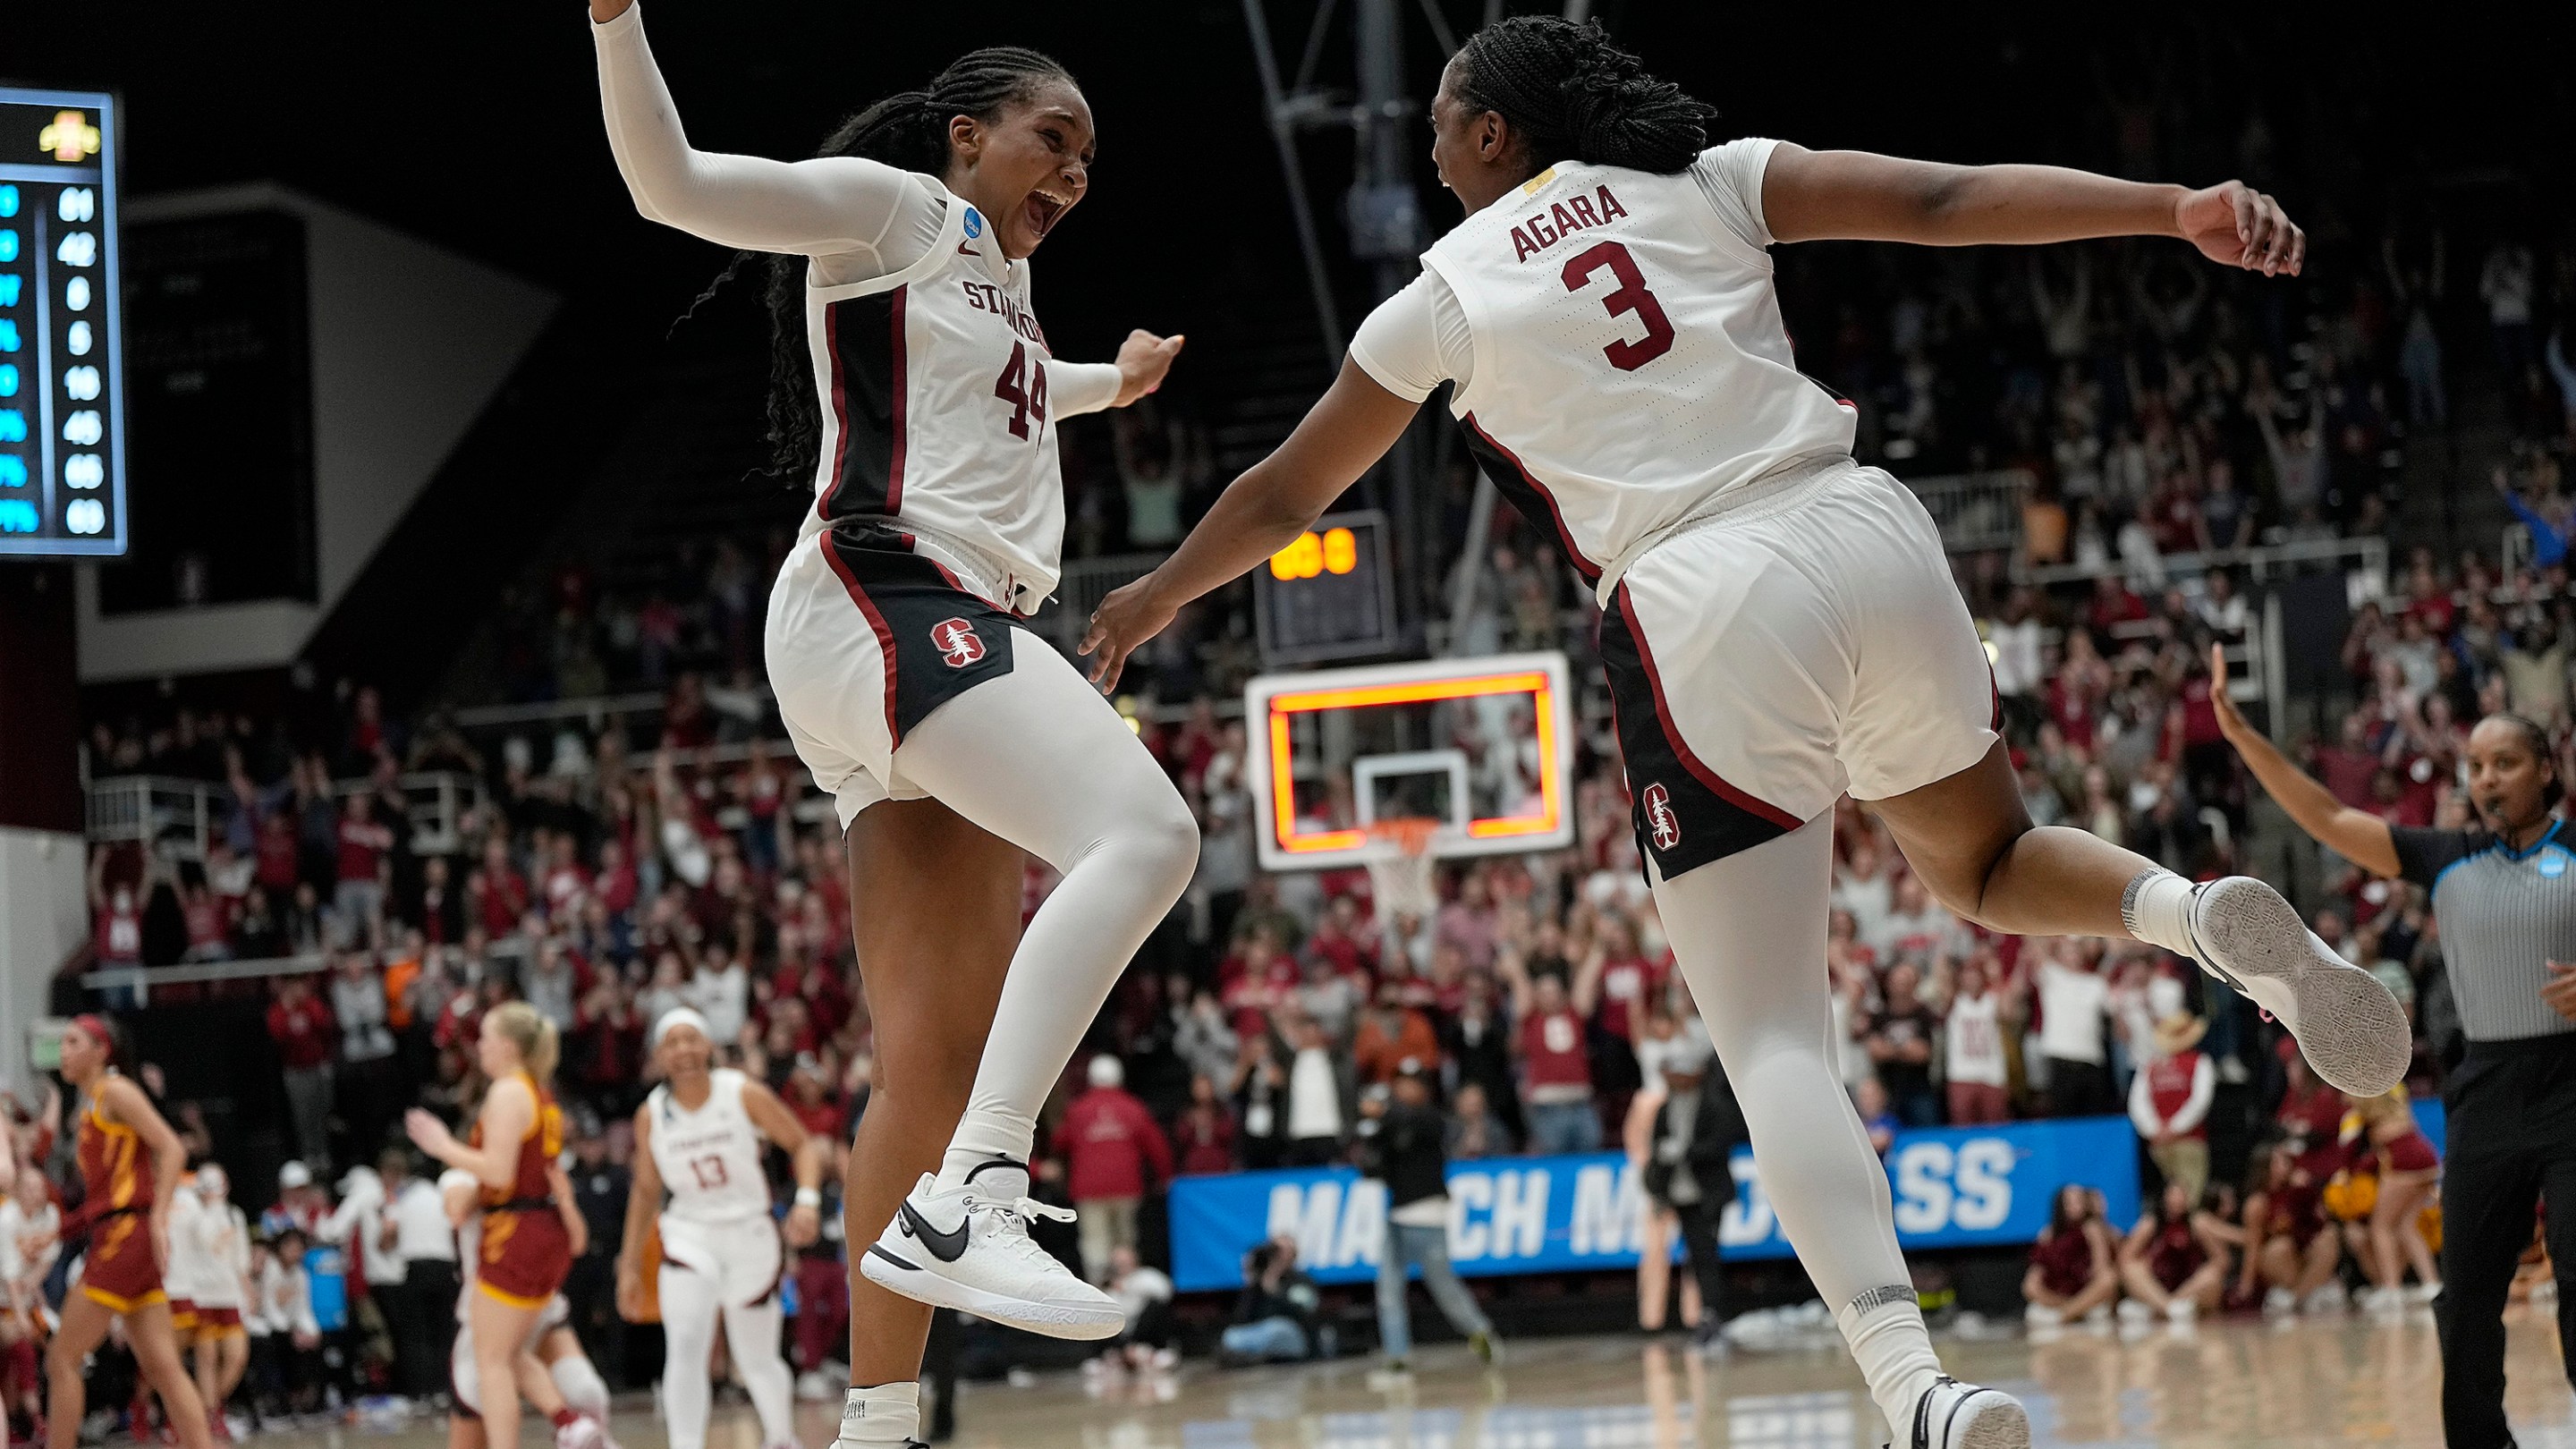 PALO ALTO, CALIFORNIA - MARCH 24: Kiki Iriafen #44 and Nunu Agara #3 of the Stanford Cardinal celebrates after they defeated the Iowa State Cyclones 87-81 in overtime in the second round of the NCAA Women's Basketball Tournament at Stanford Maples Pavilion on March 24, 2024 in Palo Alto, California. (Photo by Thearon W. Henderson/Getty Images)